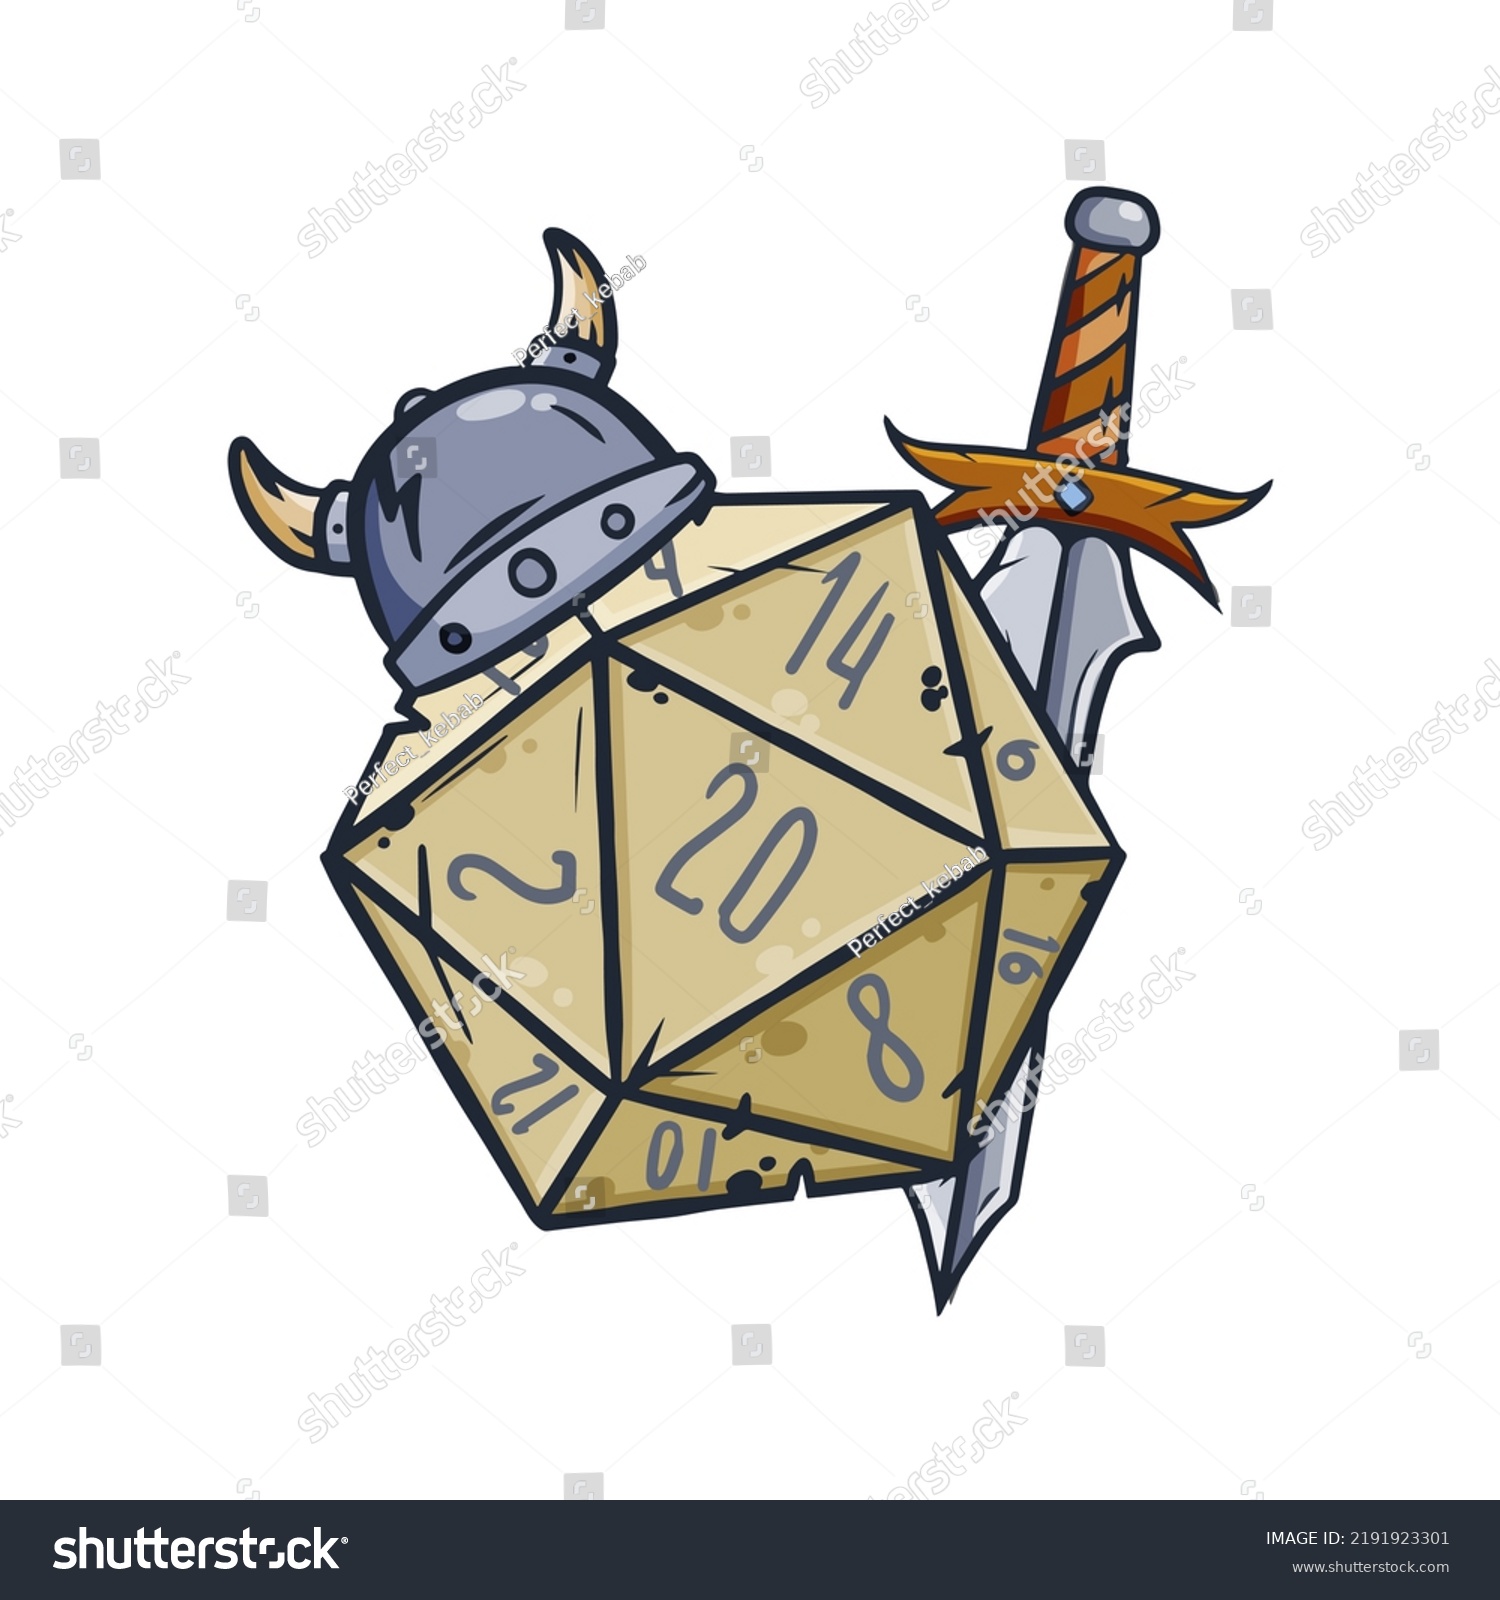 SVG of Dice d20 for playing Dnd. Dungeon and dragons board game. Treasures, paladin sword. Cartoon outline drawn illustration svg